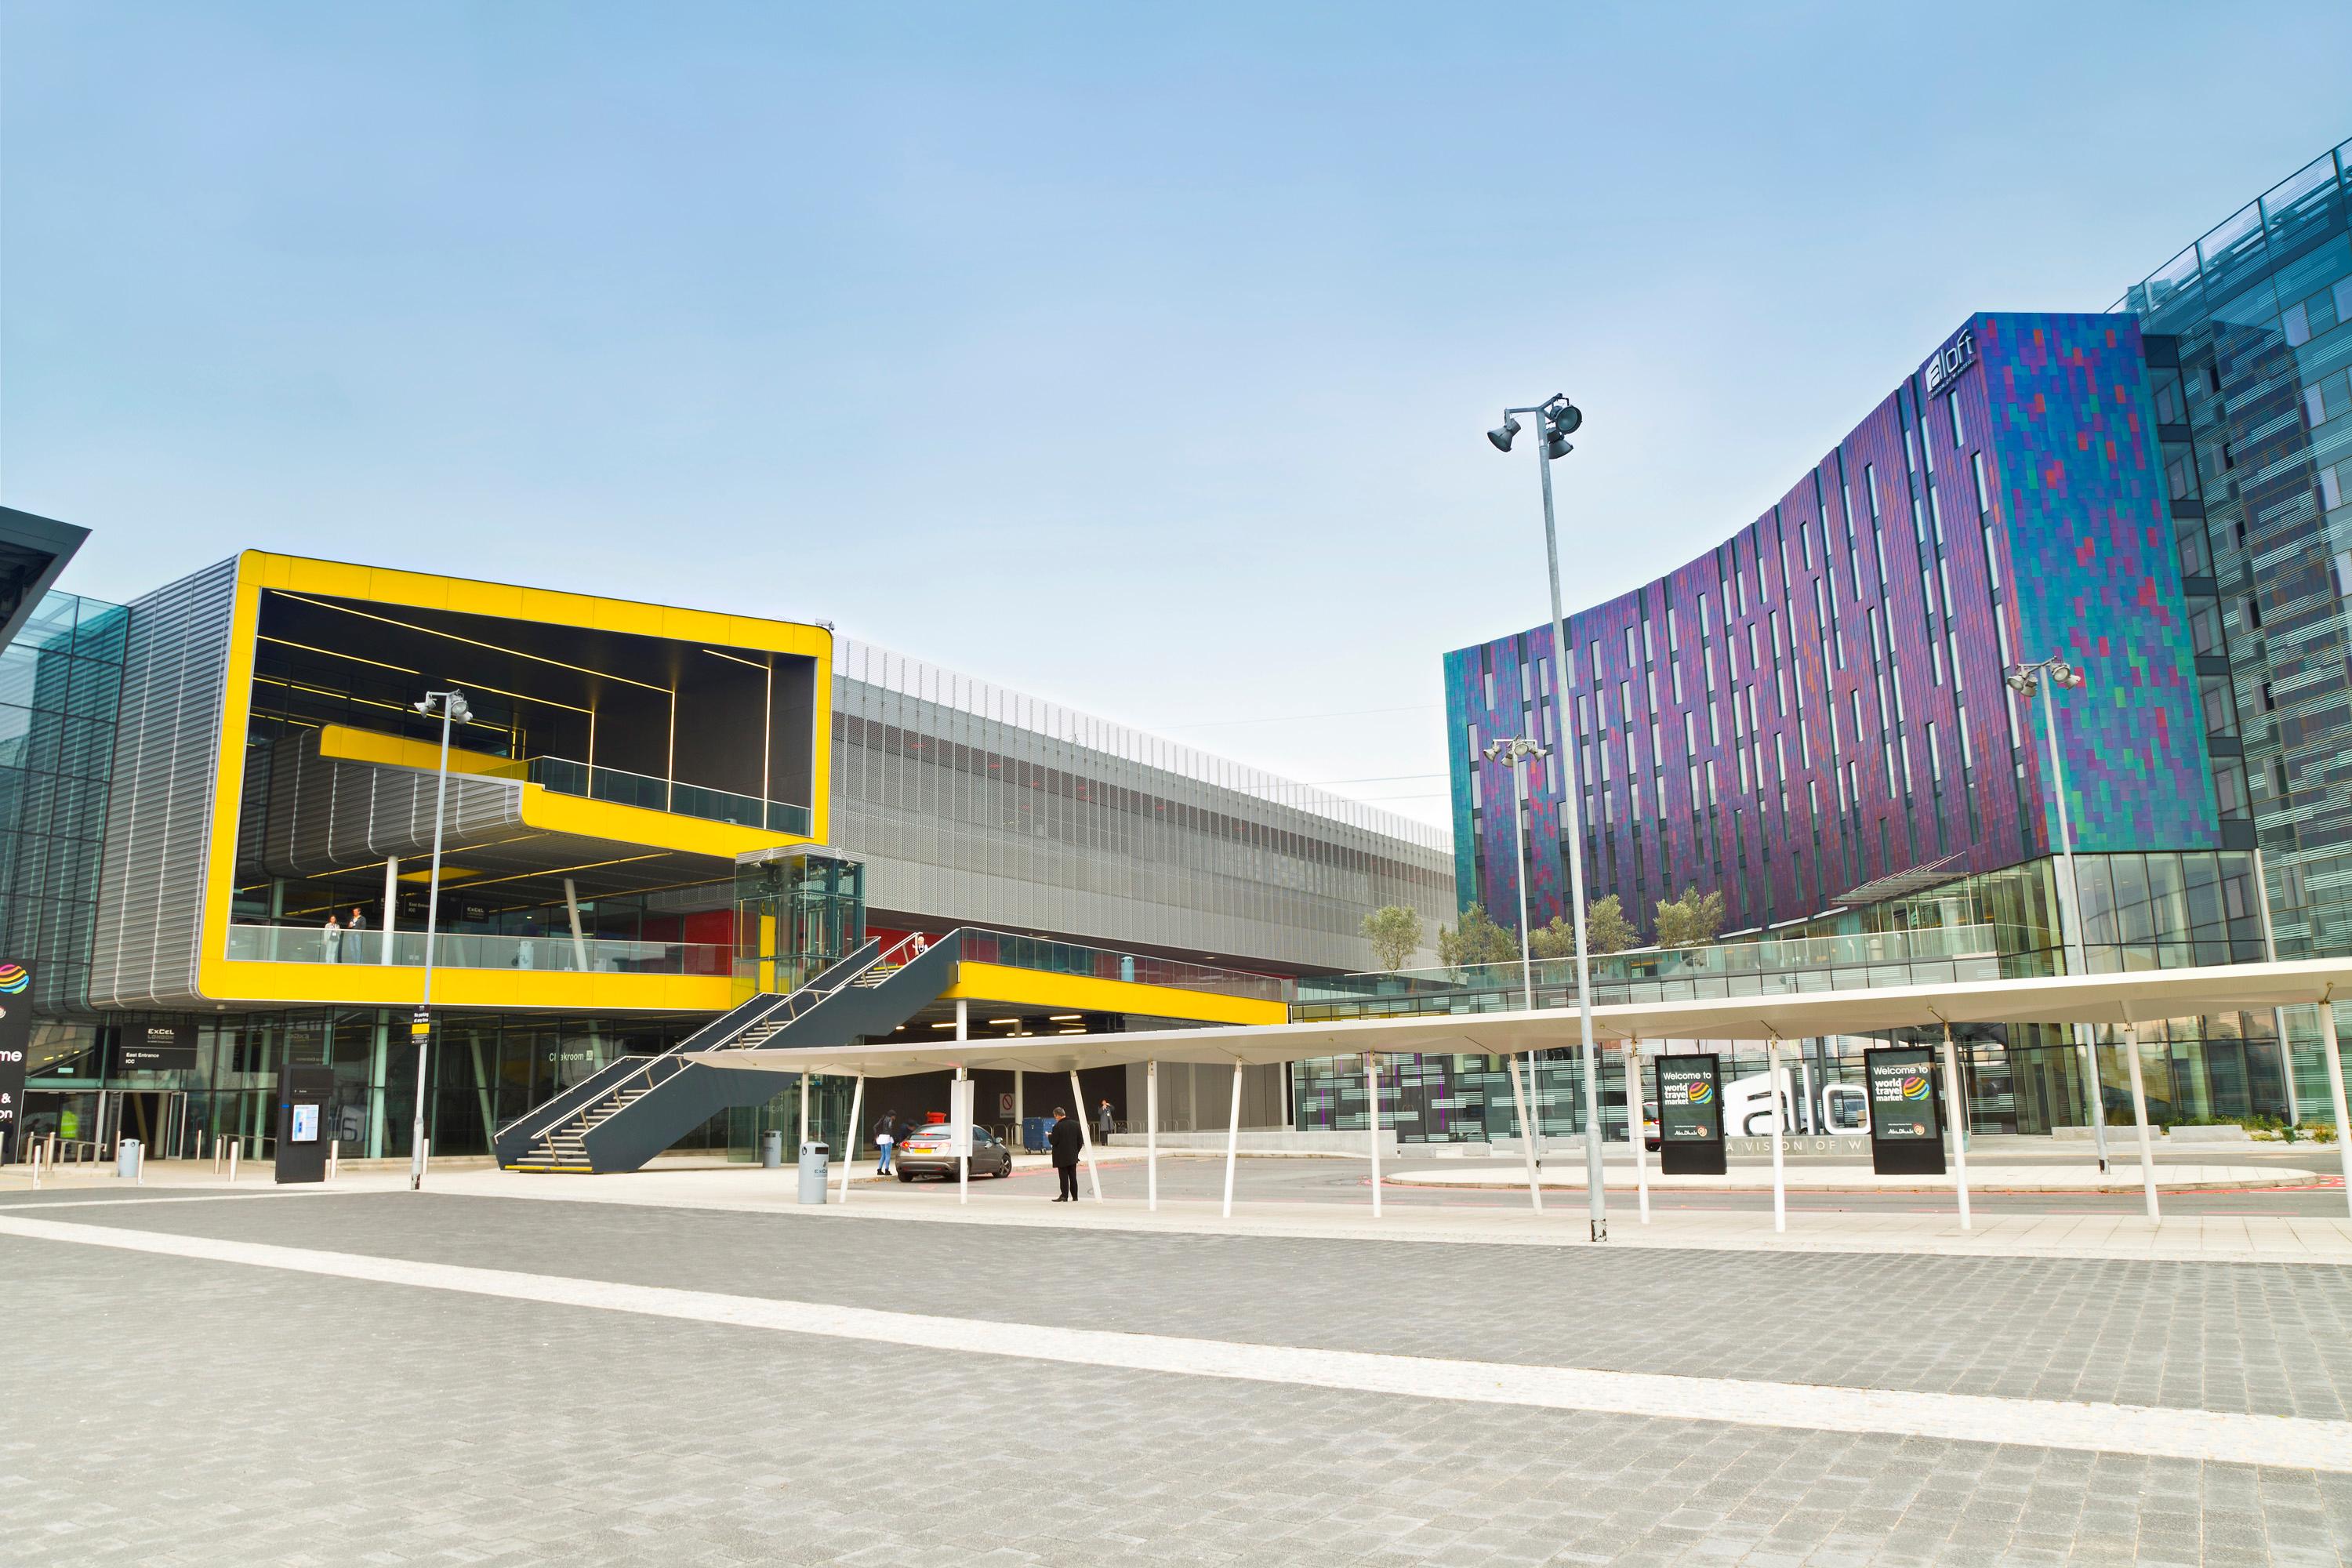 Ground level view of external halls of ExCel London